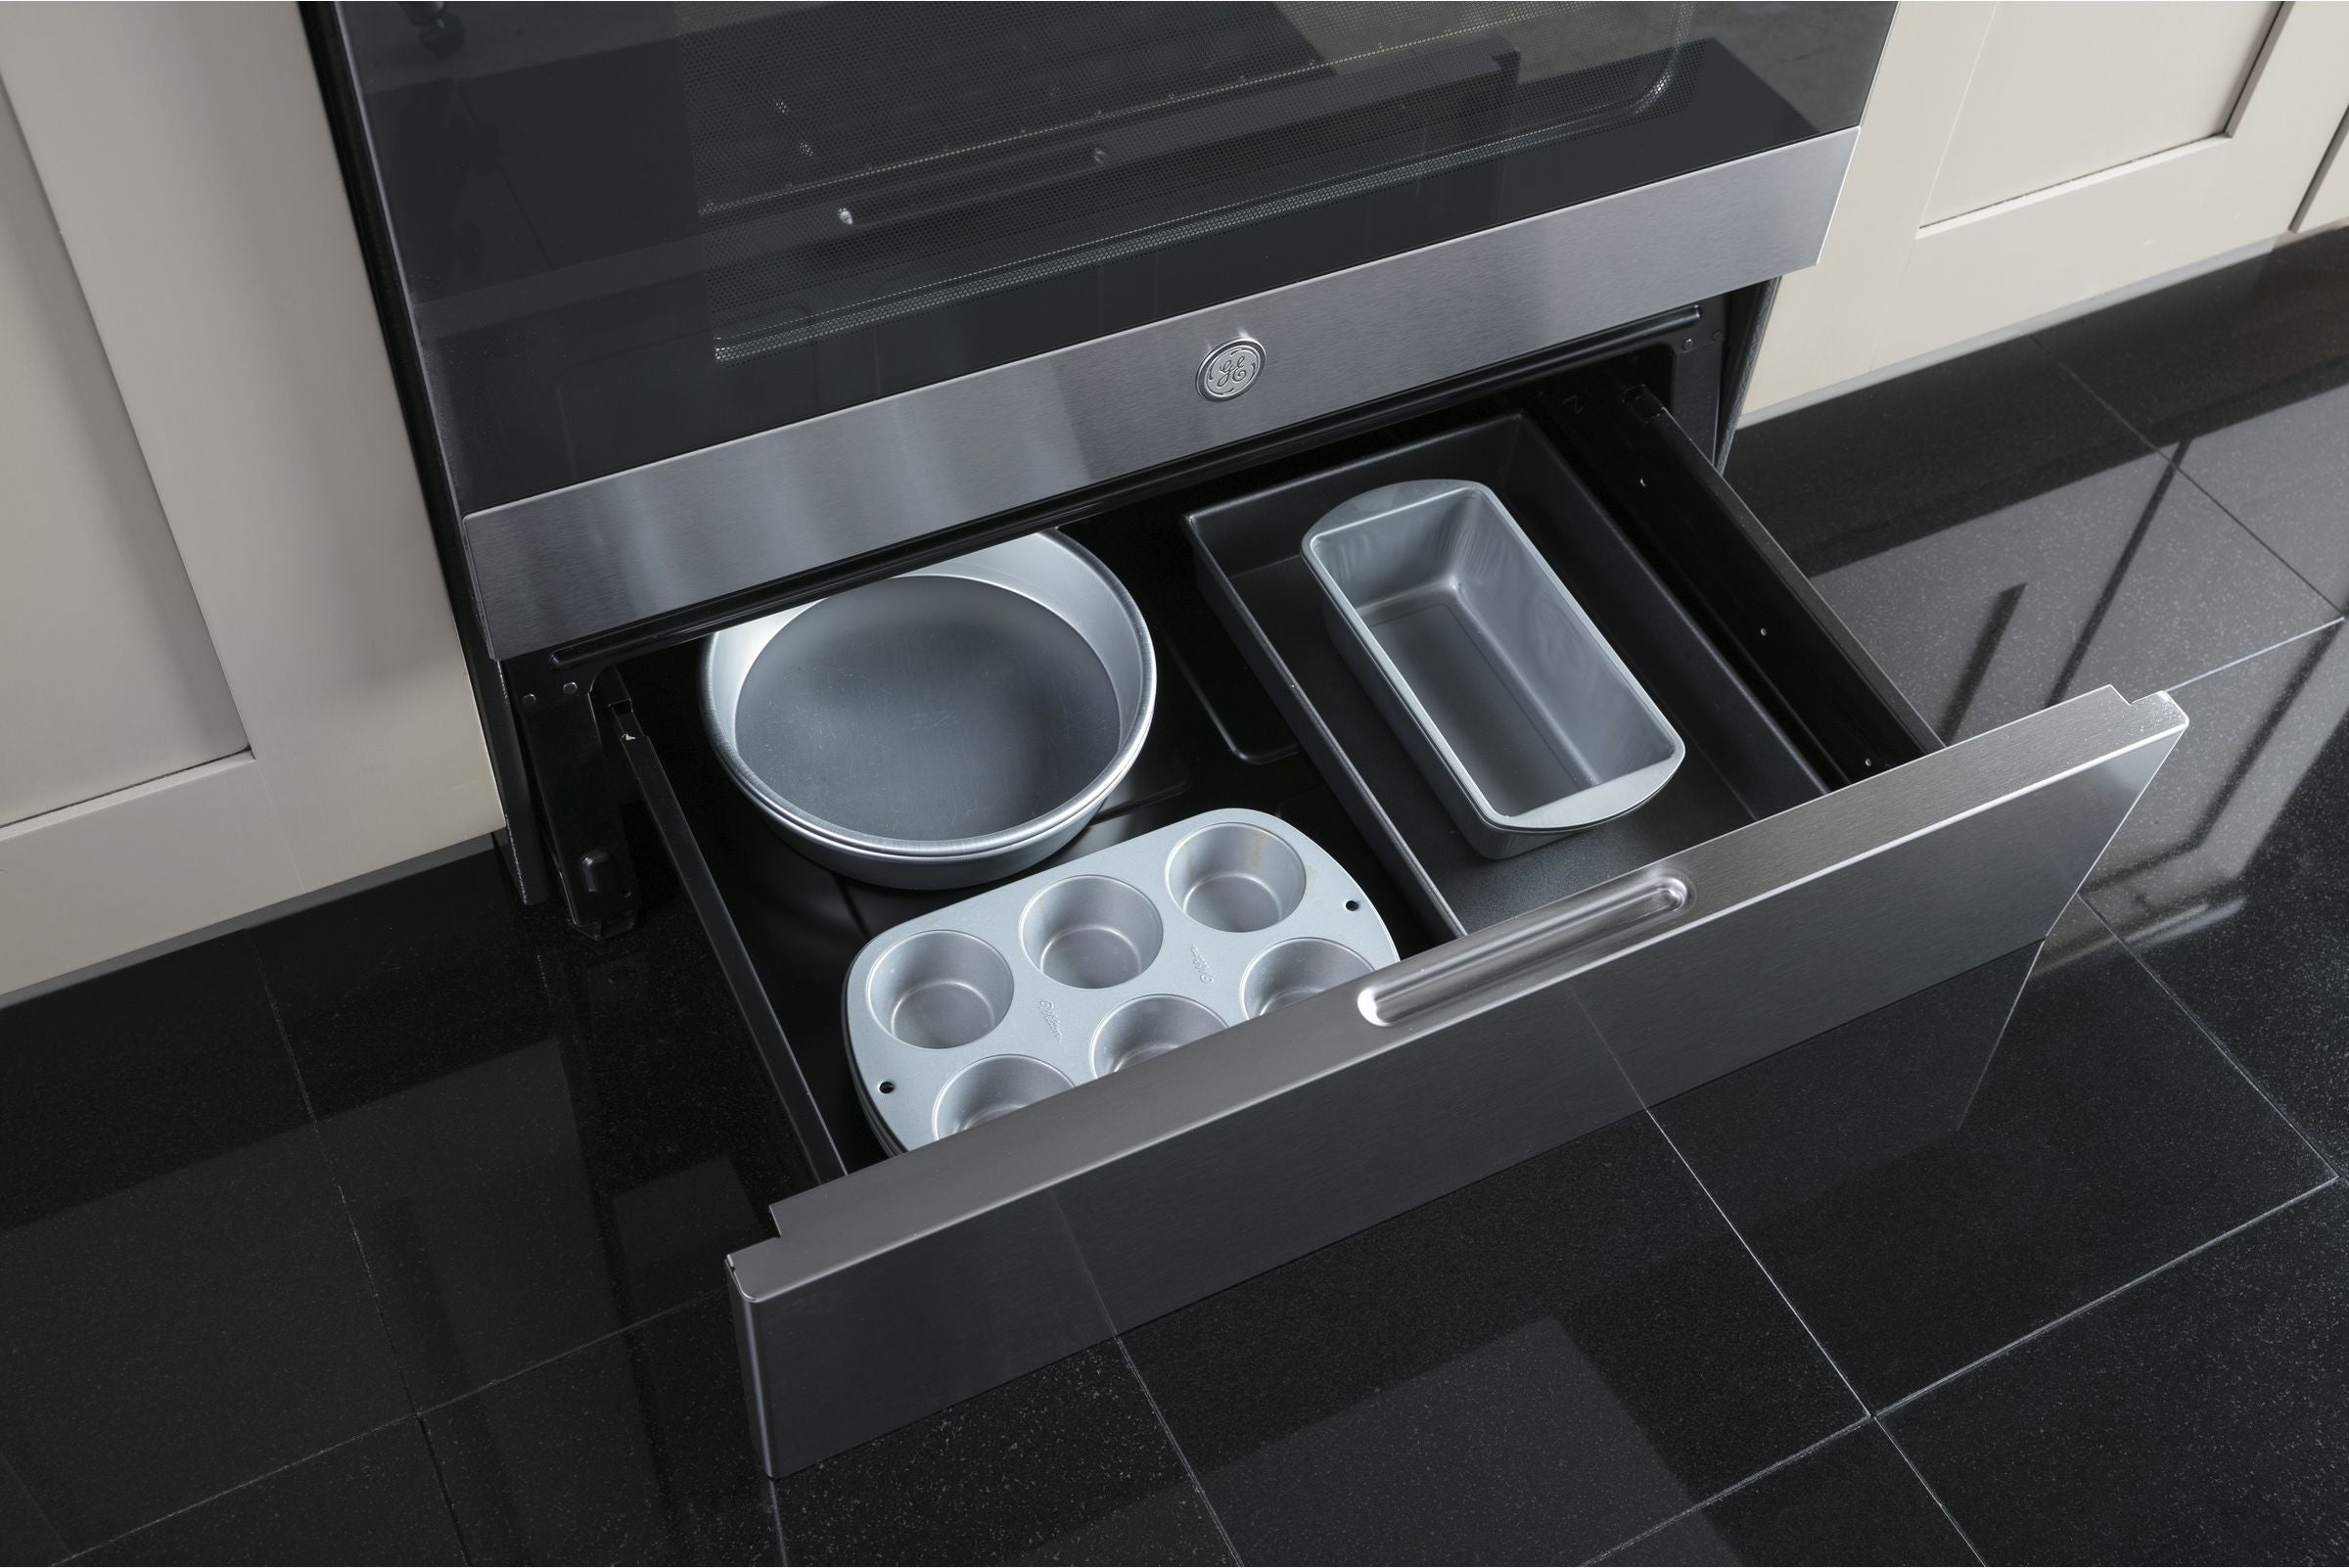 Removable Full-width Storage Drawer